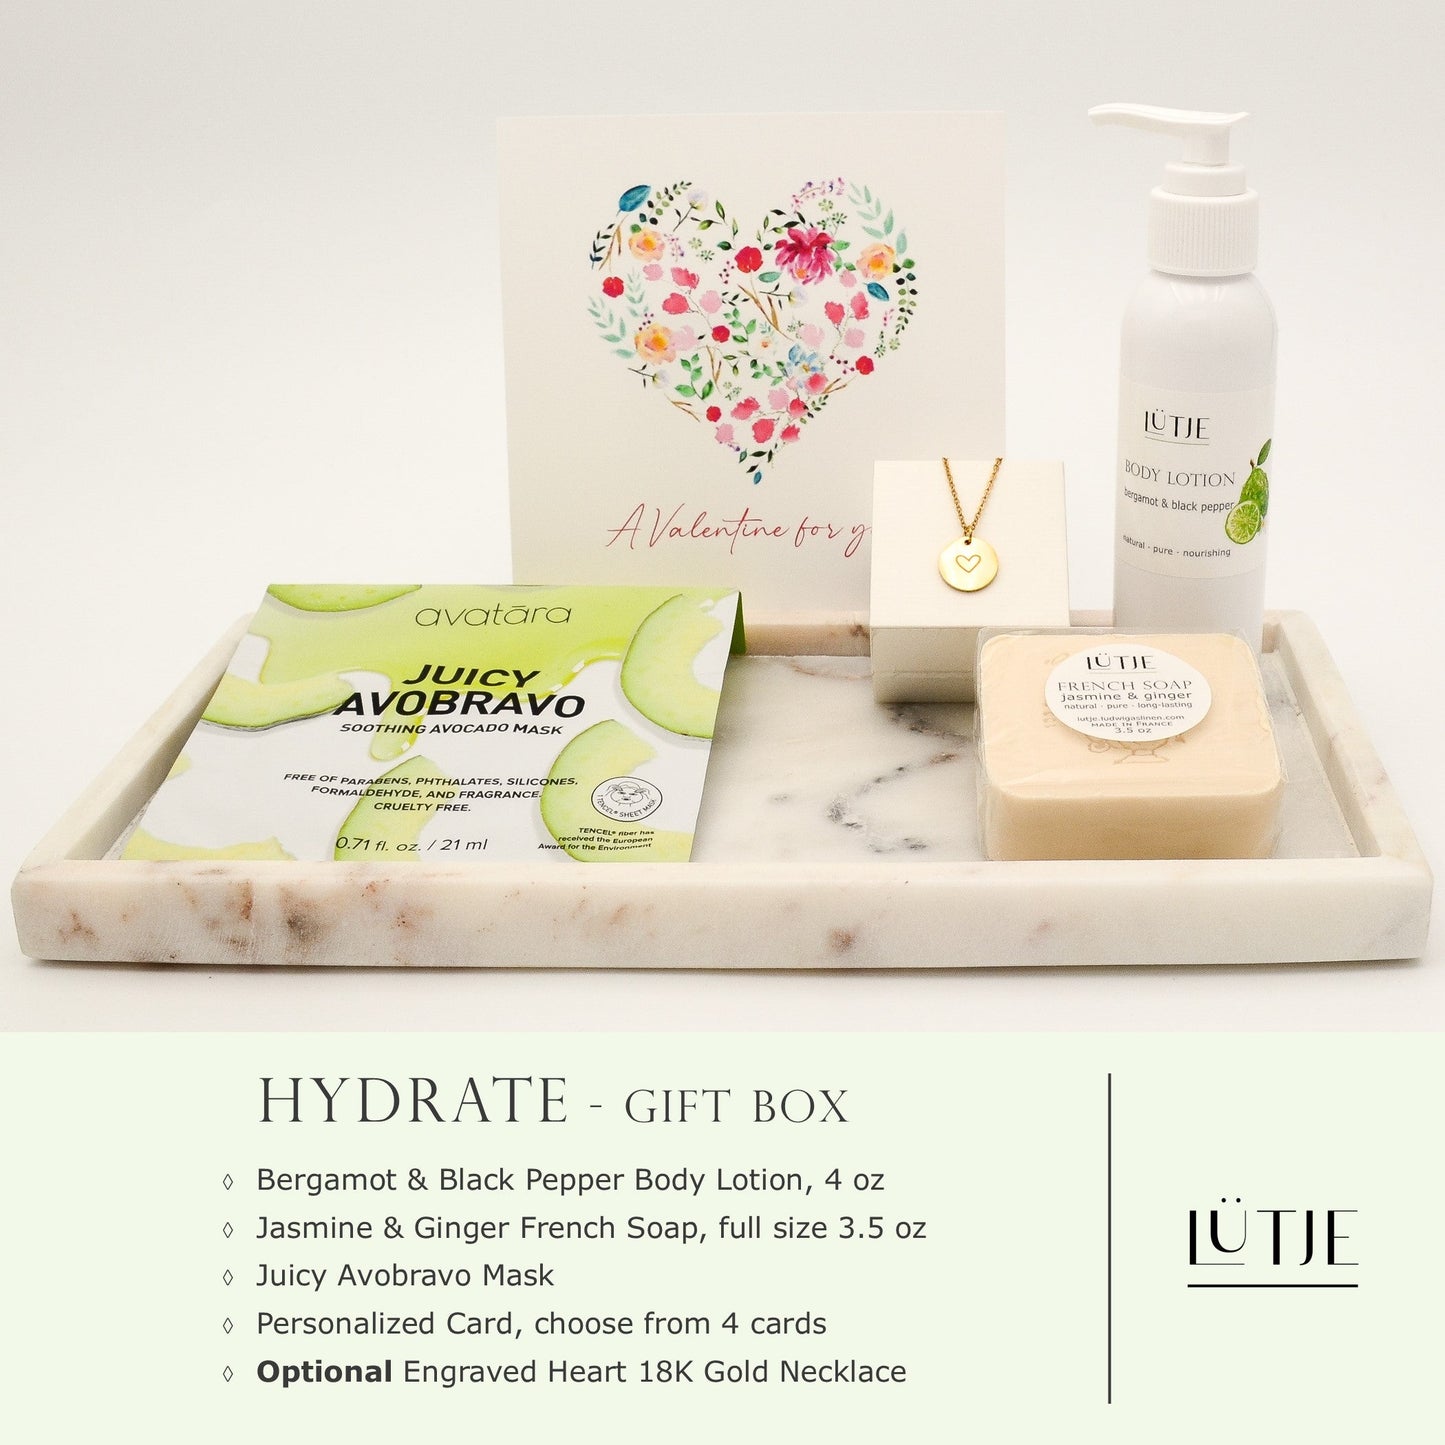 Hydrate Gift Box for women, daughter, mom, BFF, wife, sister or grandma, includes Bergamot & Black Pepper body lotion, French soap, hydrating face mask, and optional 18K gold-plated necklace with engraved heart.